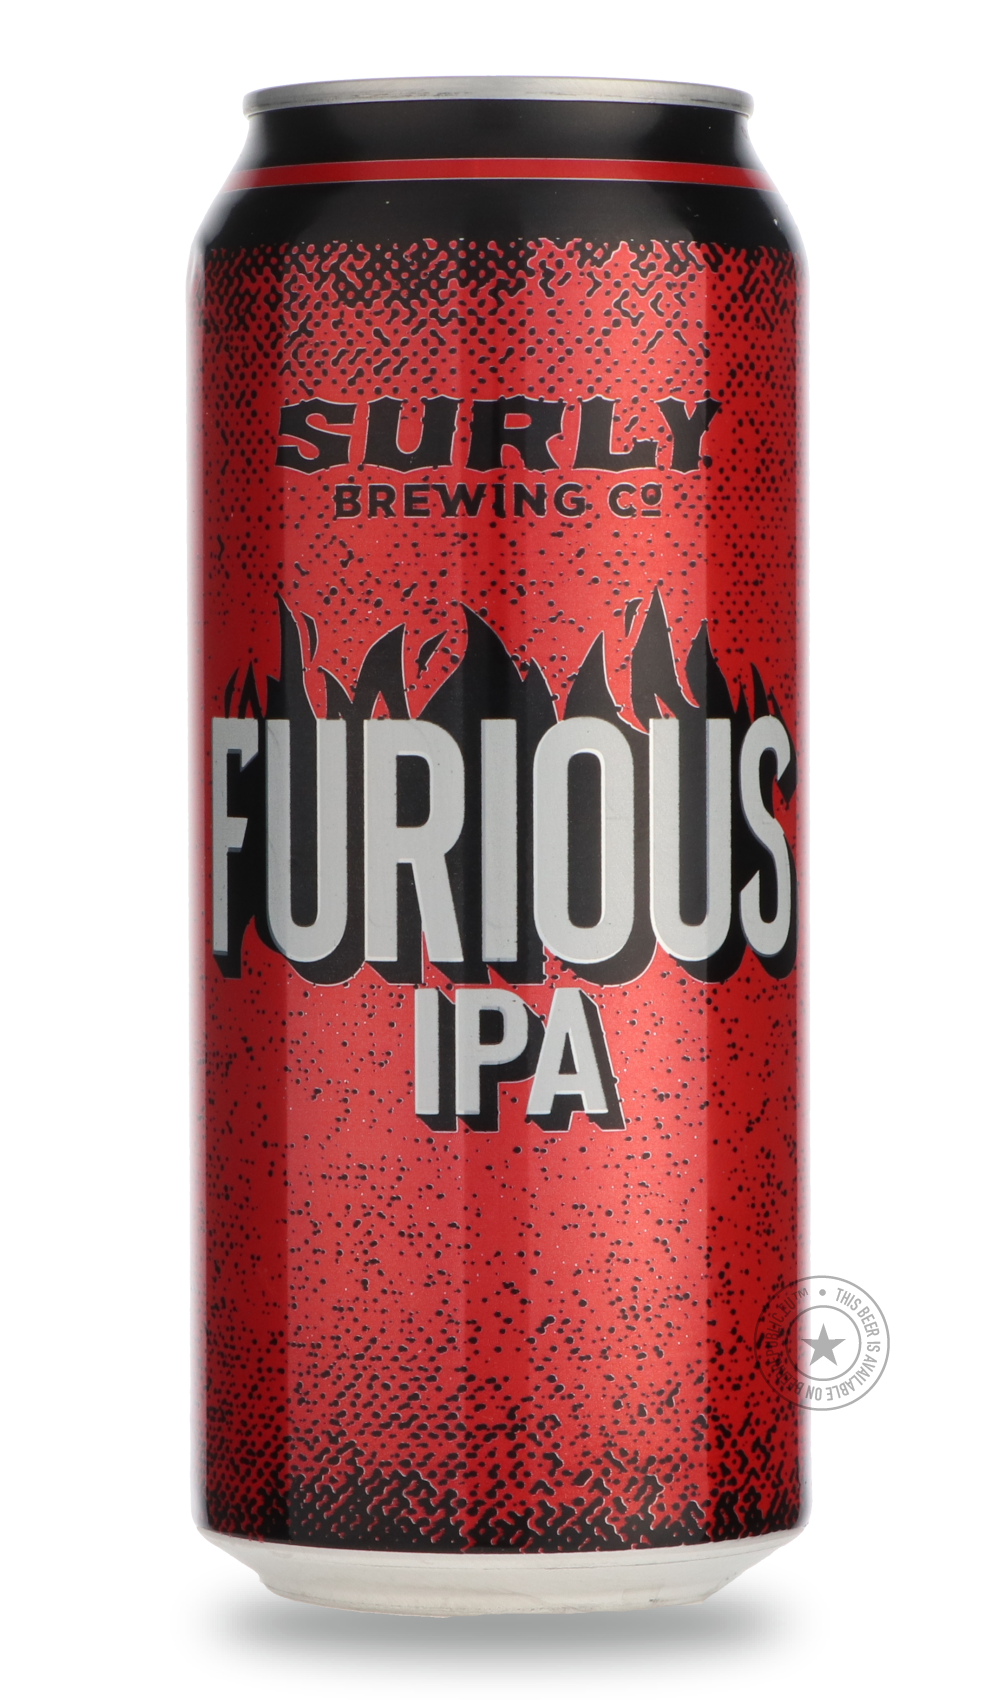 -Surly- Furious [473 ml Can]-IPA- Only @ Beer Republic - The best online beer store for American & Canadian craft beer - Buy beer online from the USA and Canada - Bier online kopen - Amerikaans bier kopen - Craft beer store - Craft beer kopen - Amerikanisch bier kaufen - Bier online kaufen - Acheter biere online - IPA - Stout - Porter - New England IPA - Hazy IPA - Imperial Stout - Barrel Aged - Barrel Aged Imperial Stout - Brown - Dark beer - Blond - Blonde - Pilsner - Lager - Wheat - Weizen - Amber - Barl